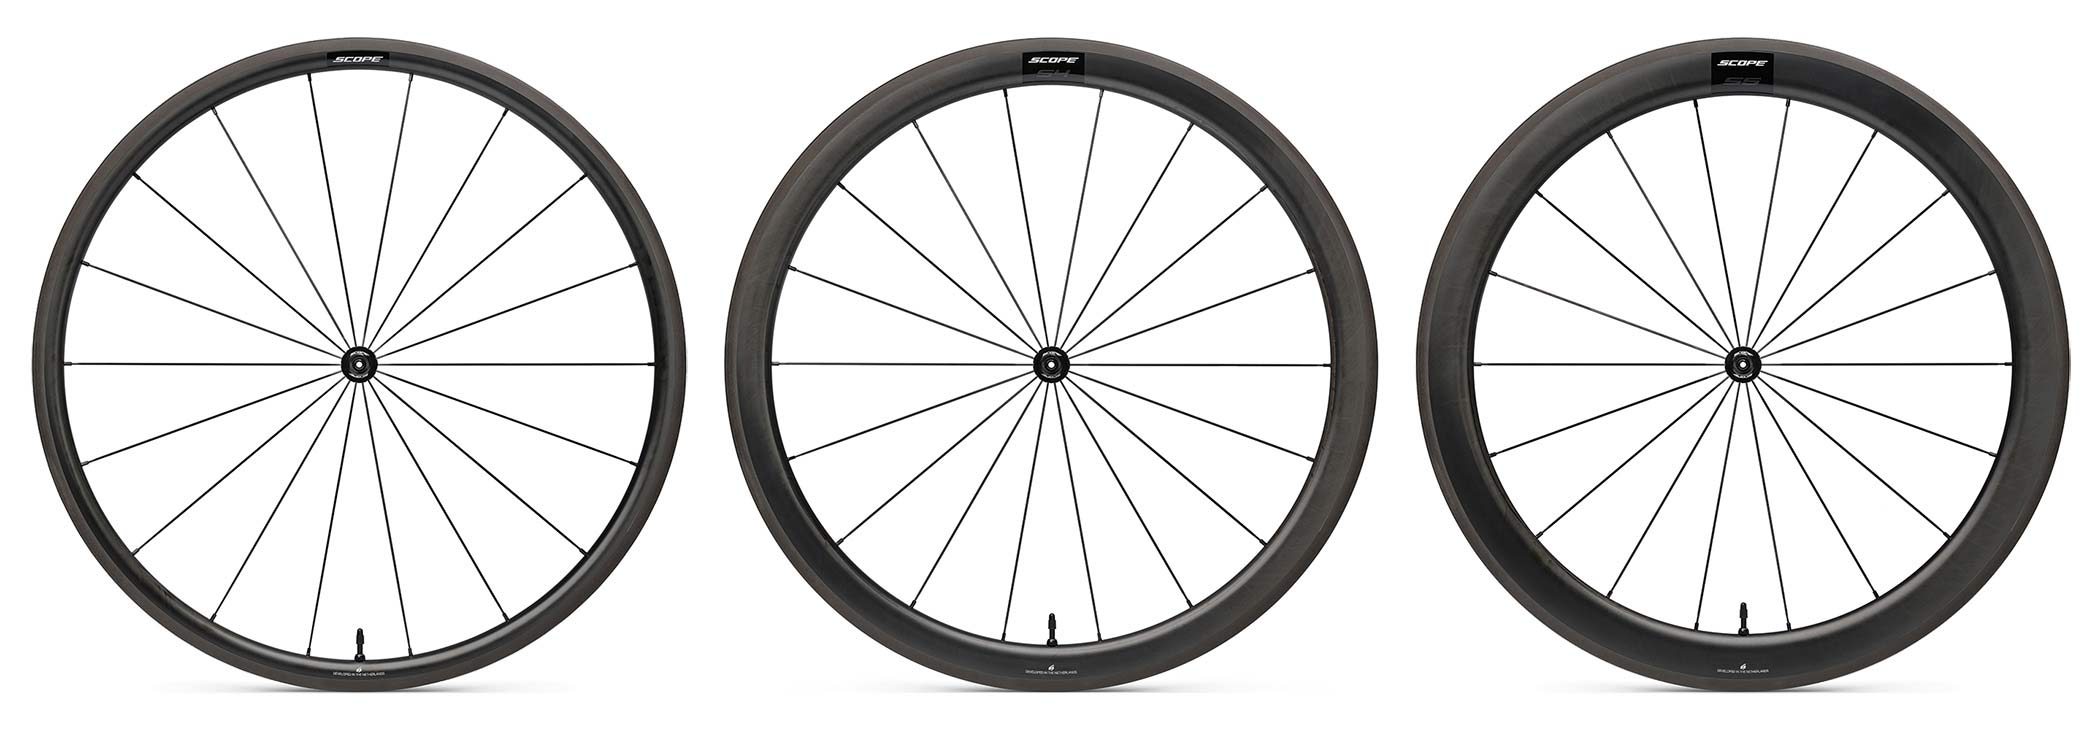 Scope Sport affordable carbon tubeless road wheels, 998€ for rim or disc brakes, three depths